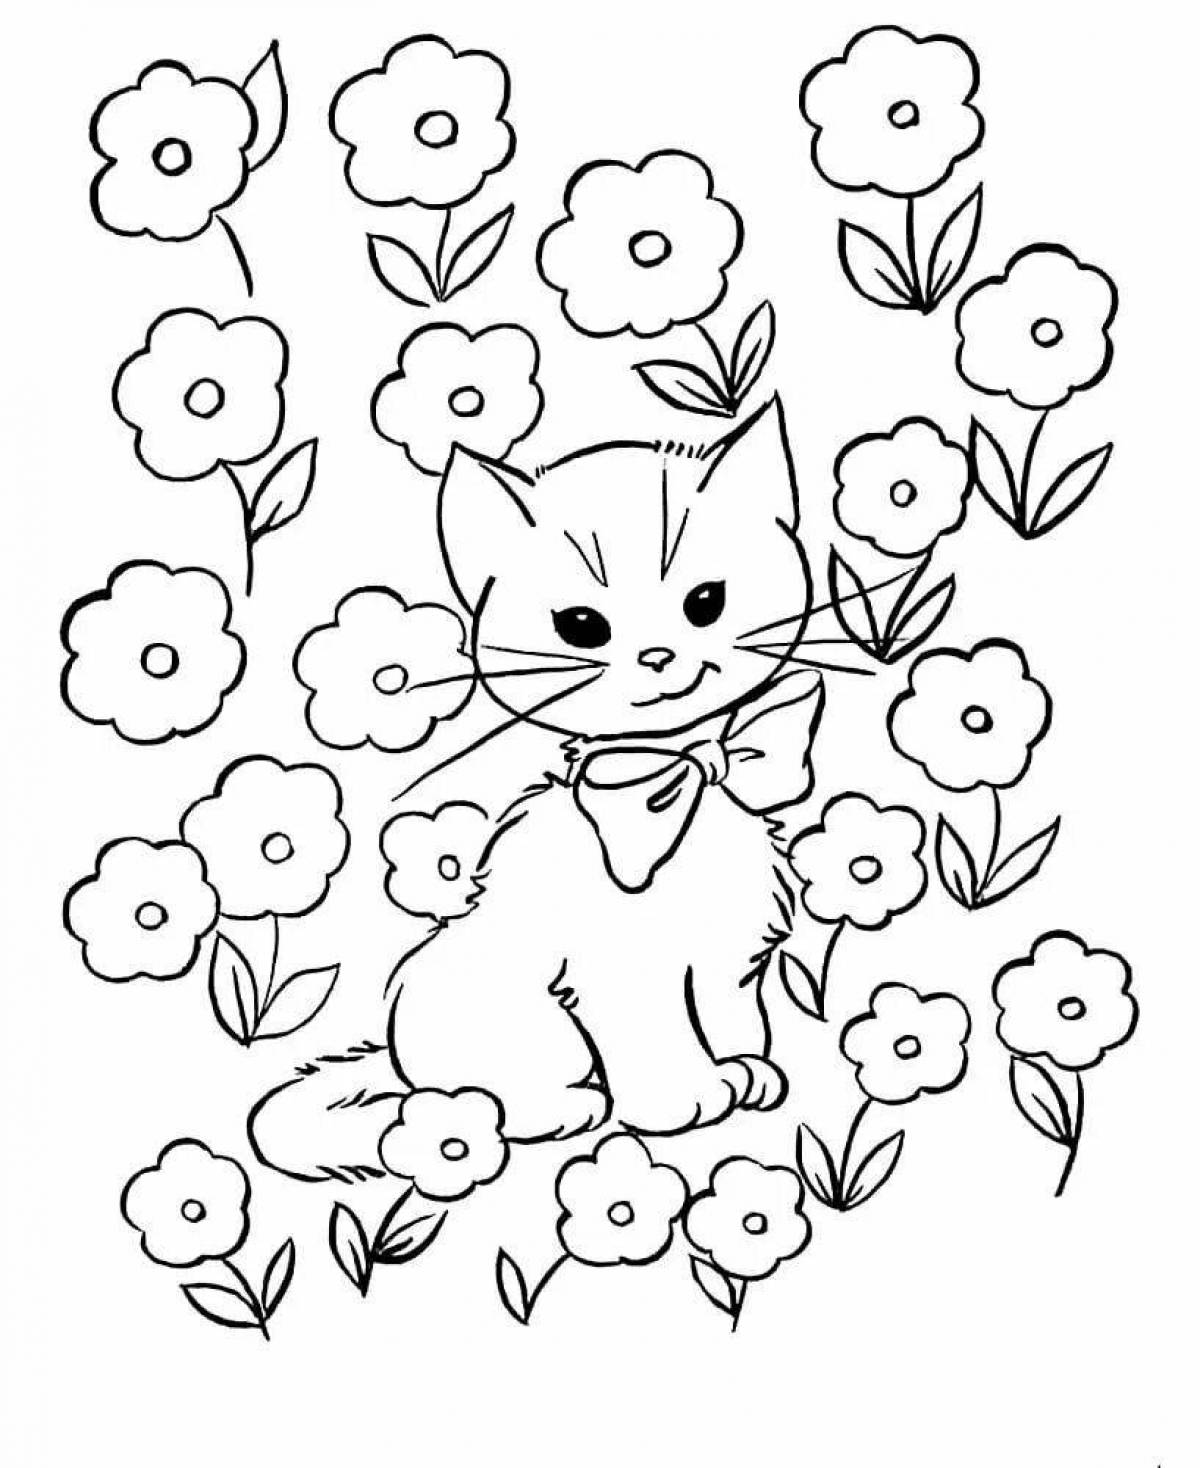 Joyful coloring kitty for children 5-6 years old